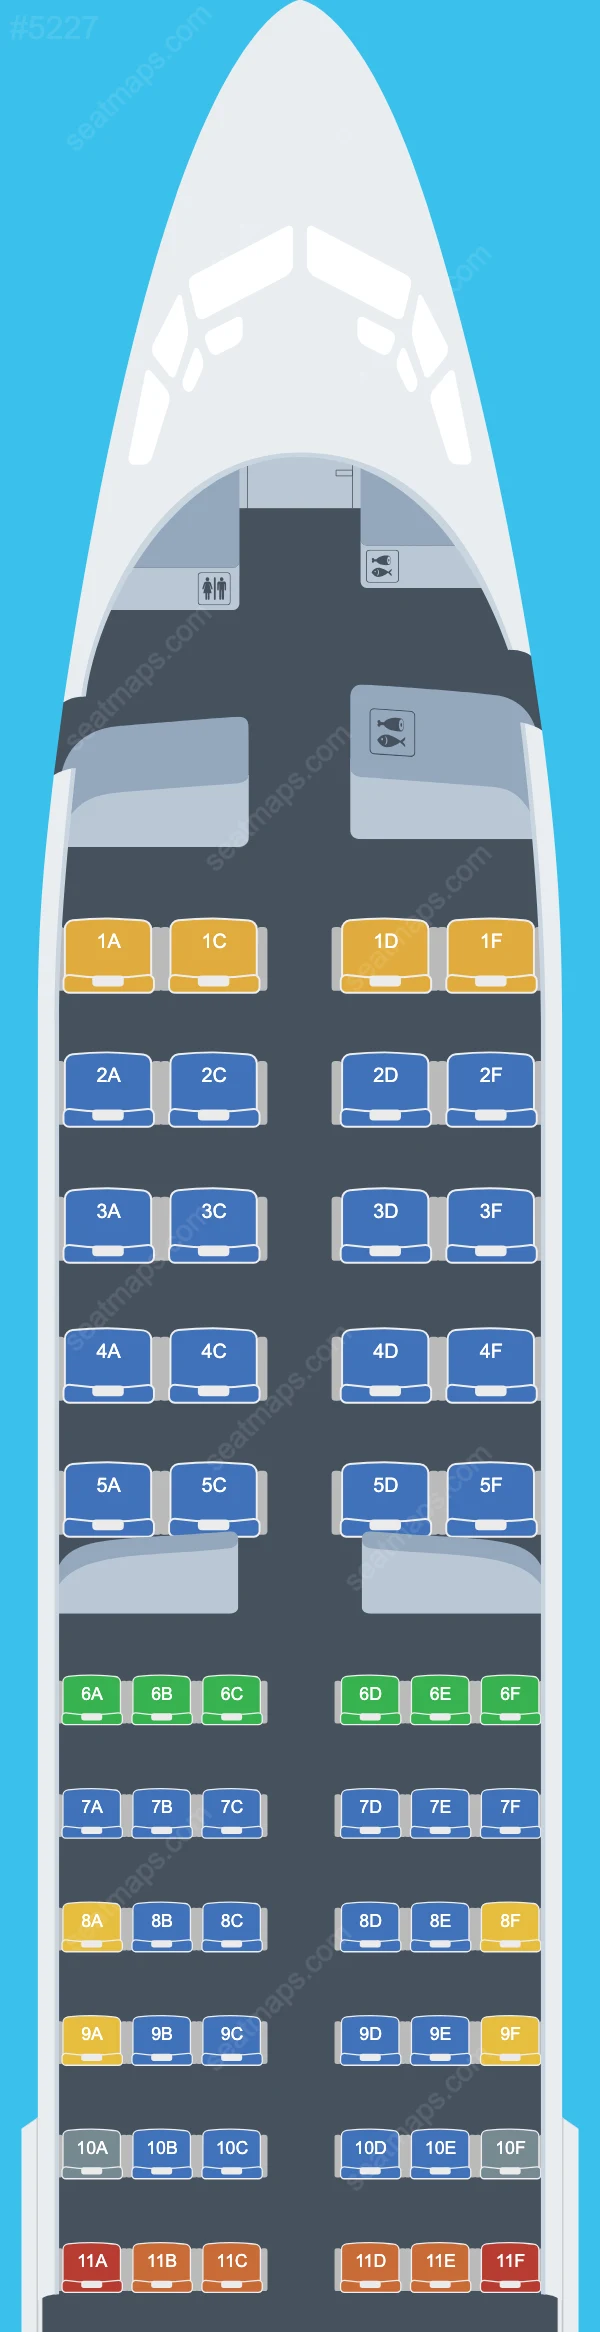 Tassili Airlines Boeing 737 Seat Maps 737-800